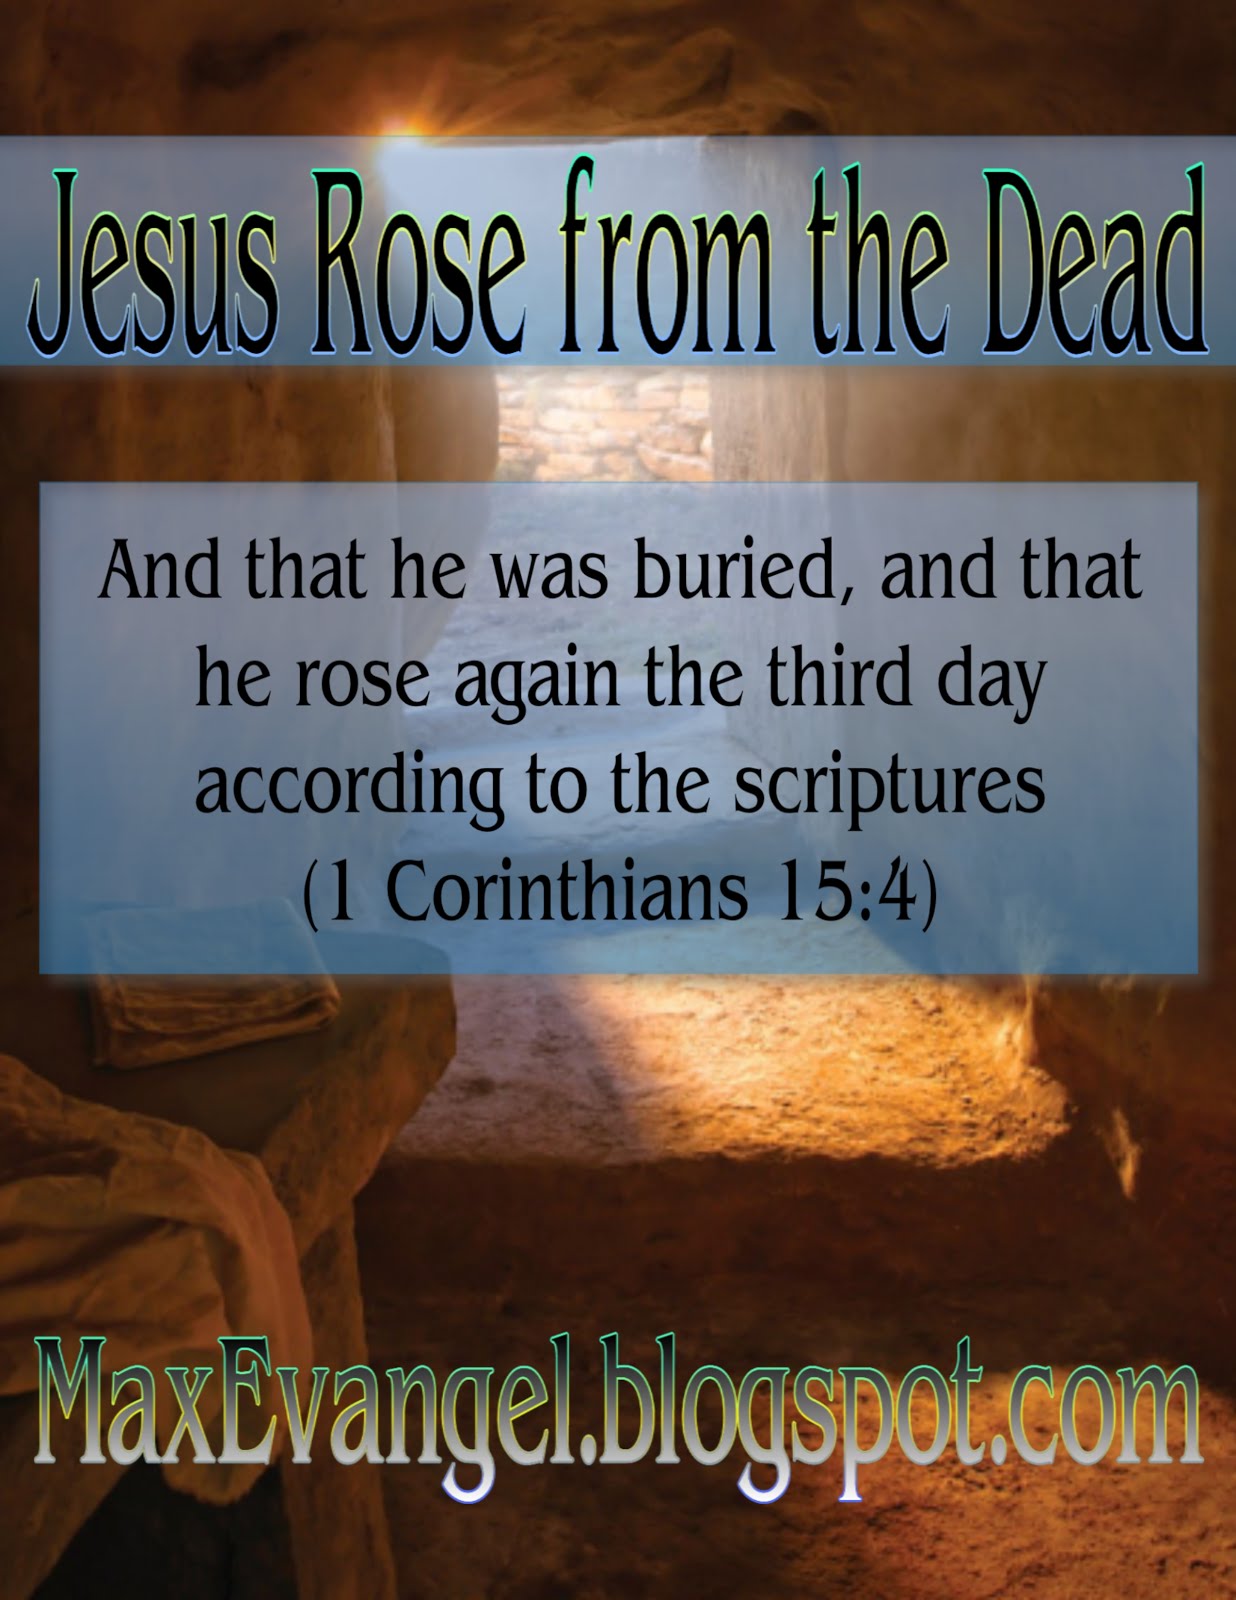 After Dying for Our Sins, Jesus Rose Again